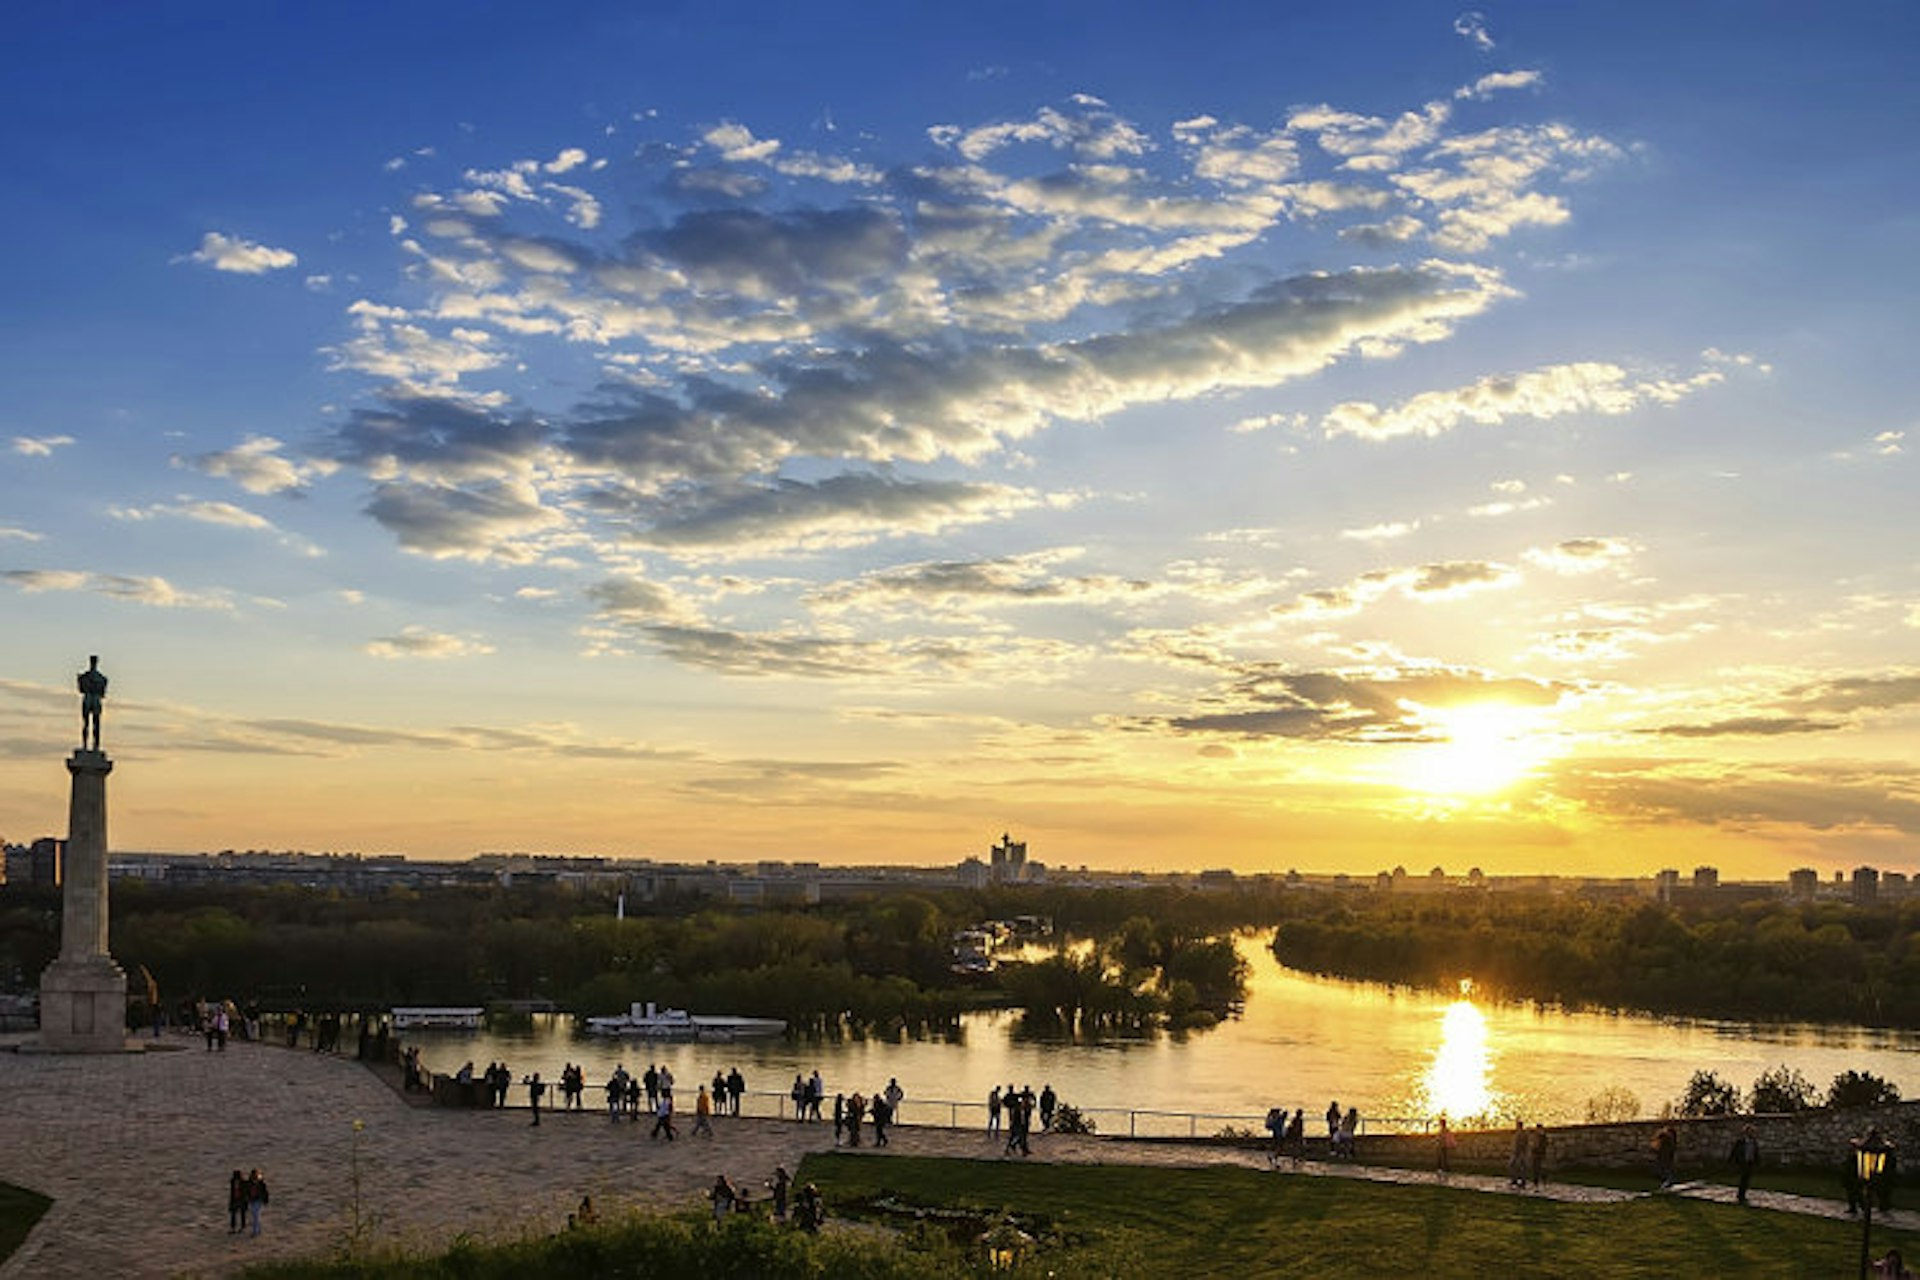 Sunset views from Kalemegdan over the confluence of the Sava and the Danube. Image by Djordje Rusic / Getty Images